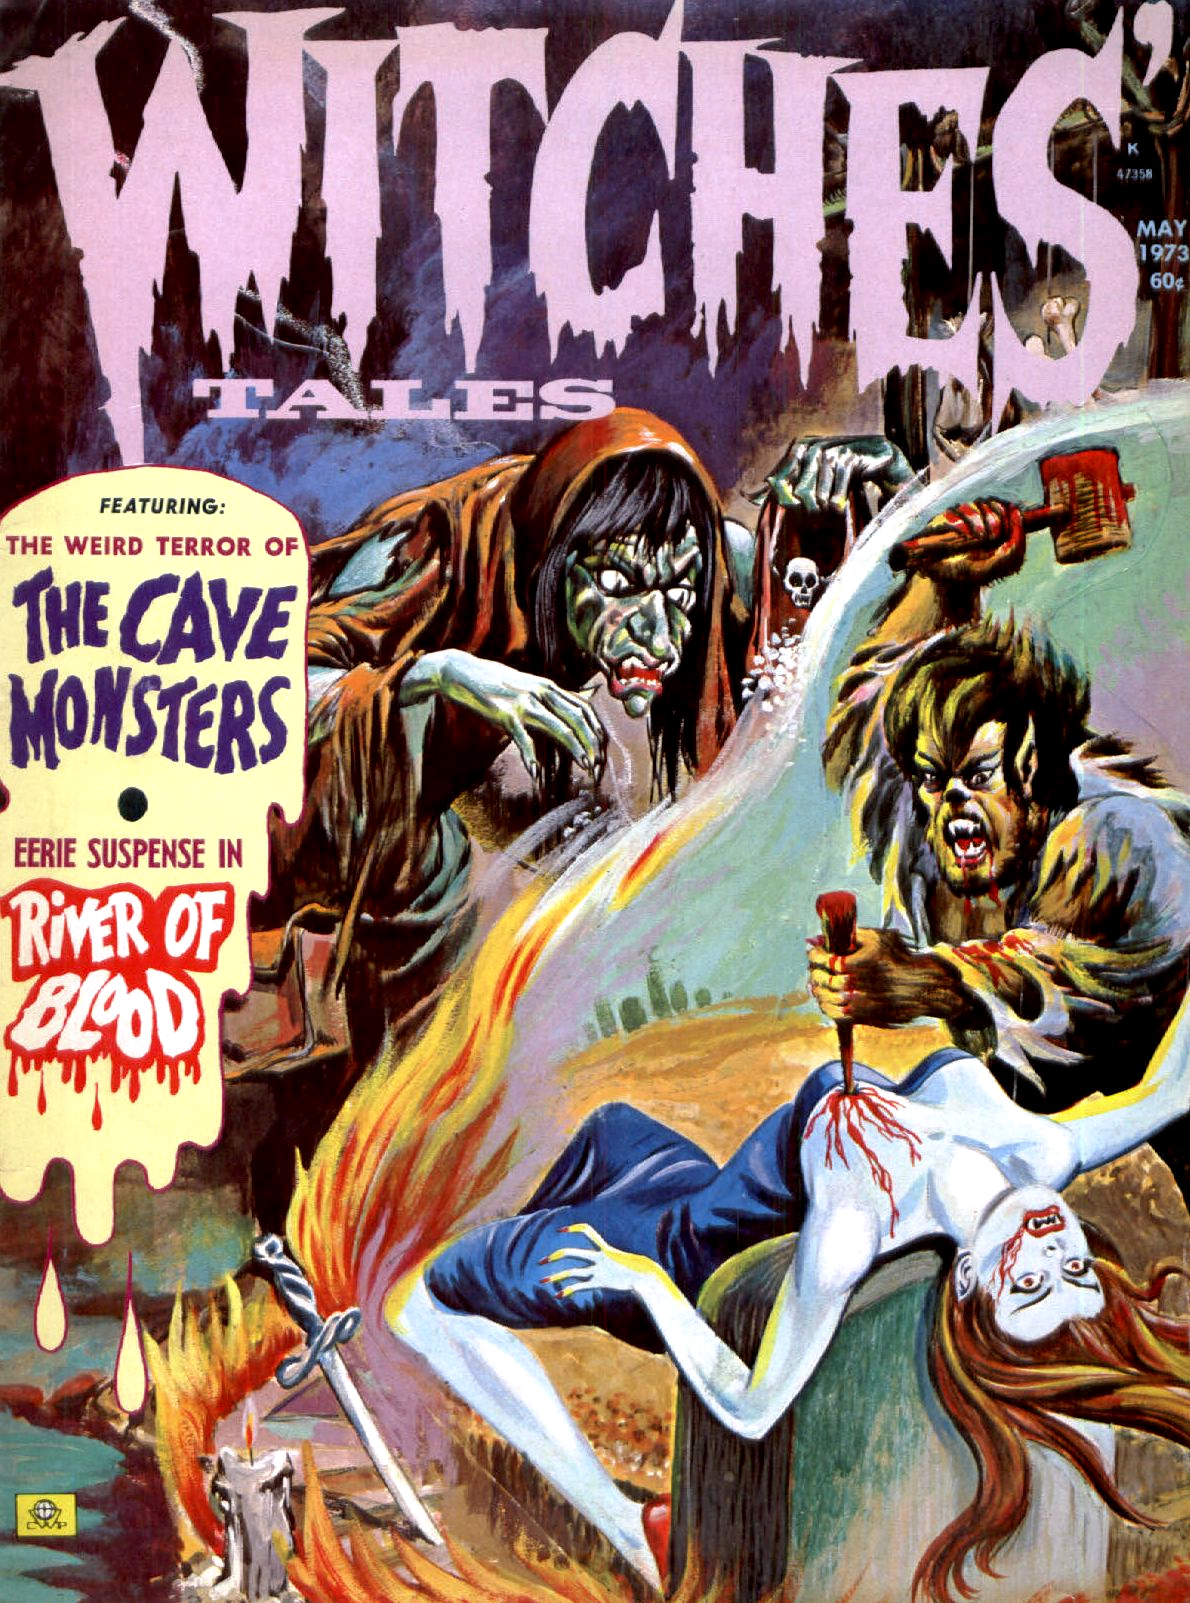 Witches Tales #15